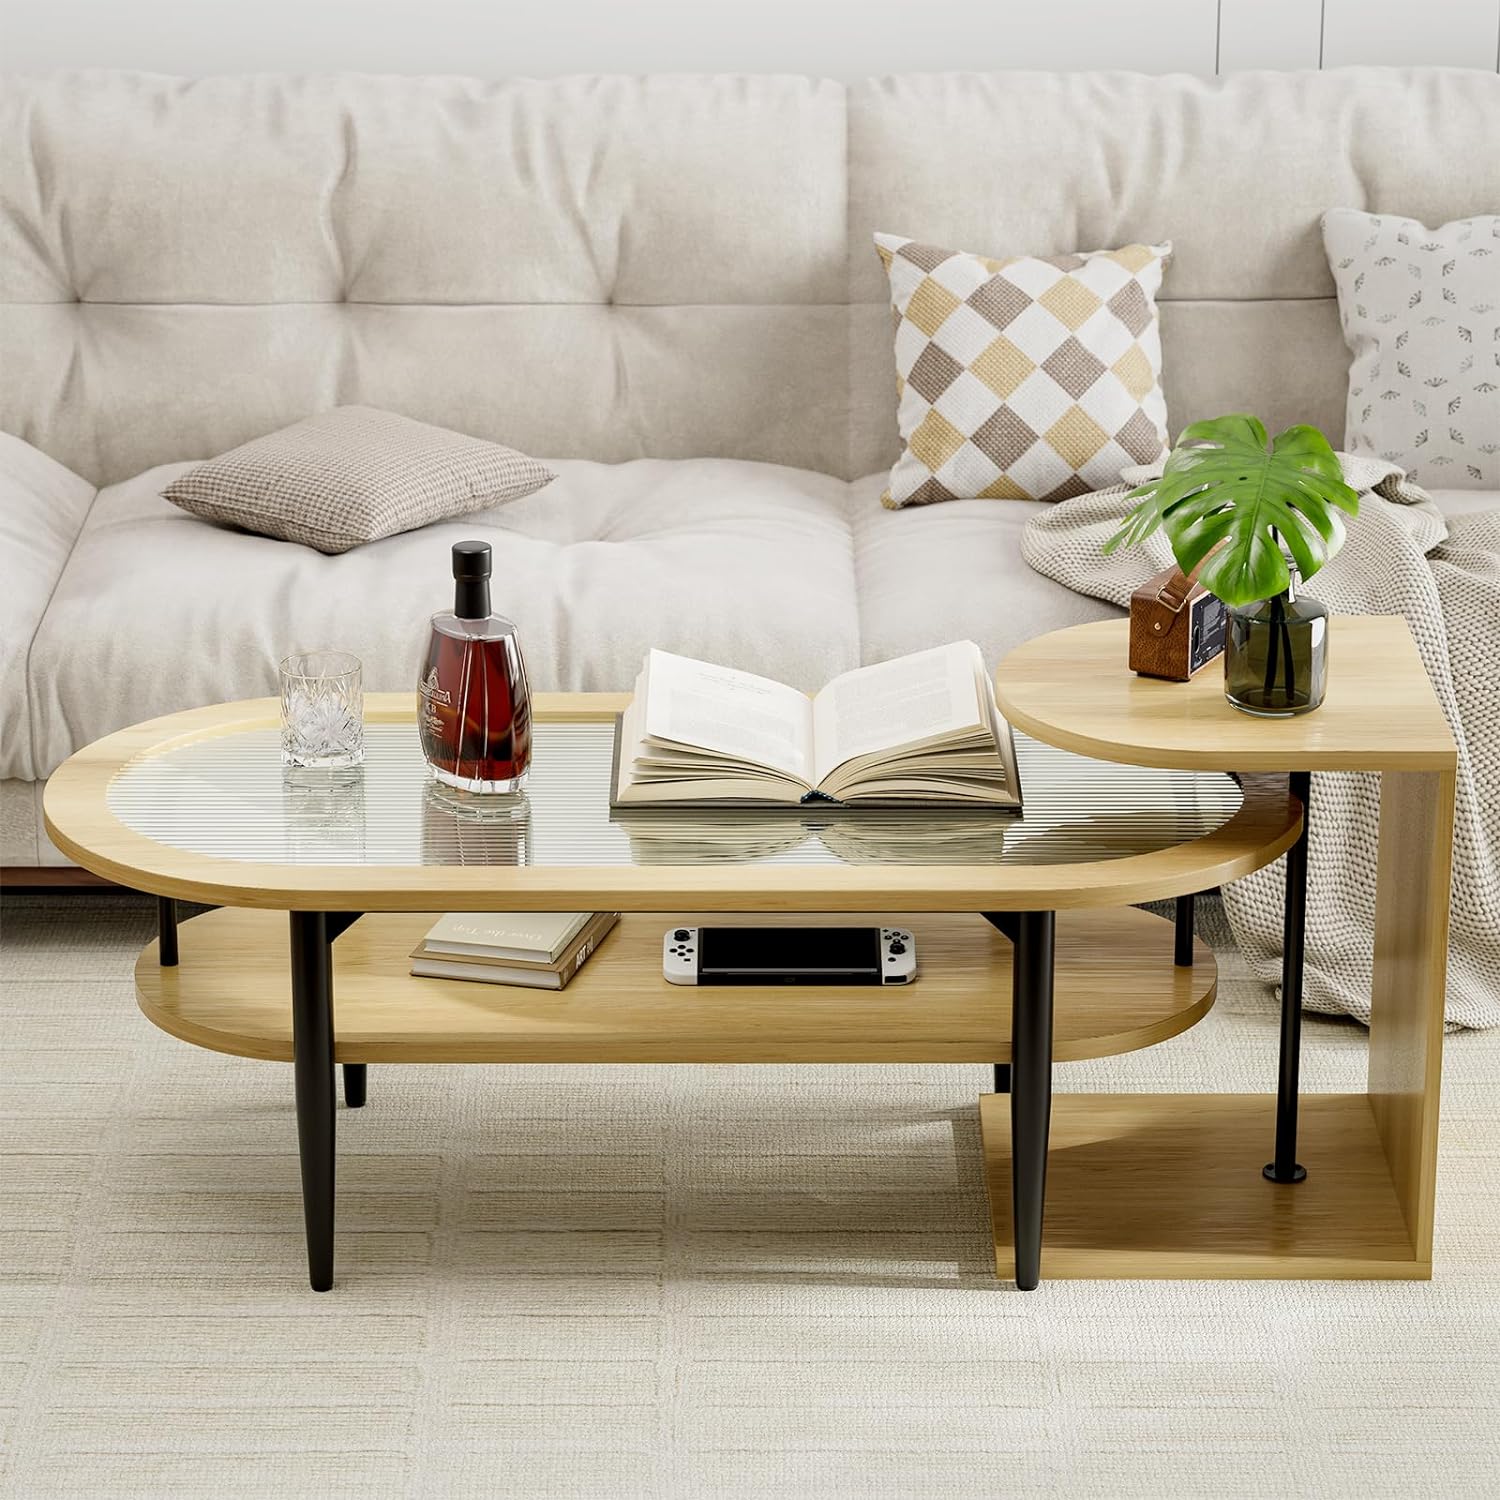 IKIFLY Glass Coffee Table Set, Natural Coffee Tea Table with Changhong Glass Table Top and Side Table for Living Room Dining Room